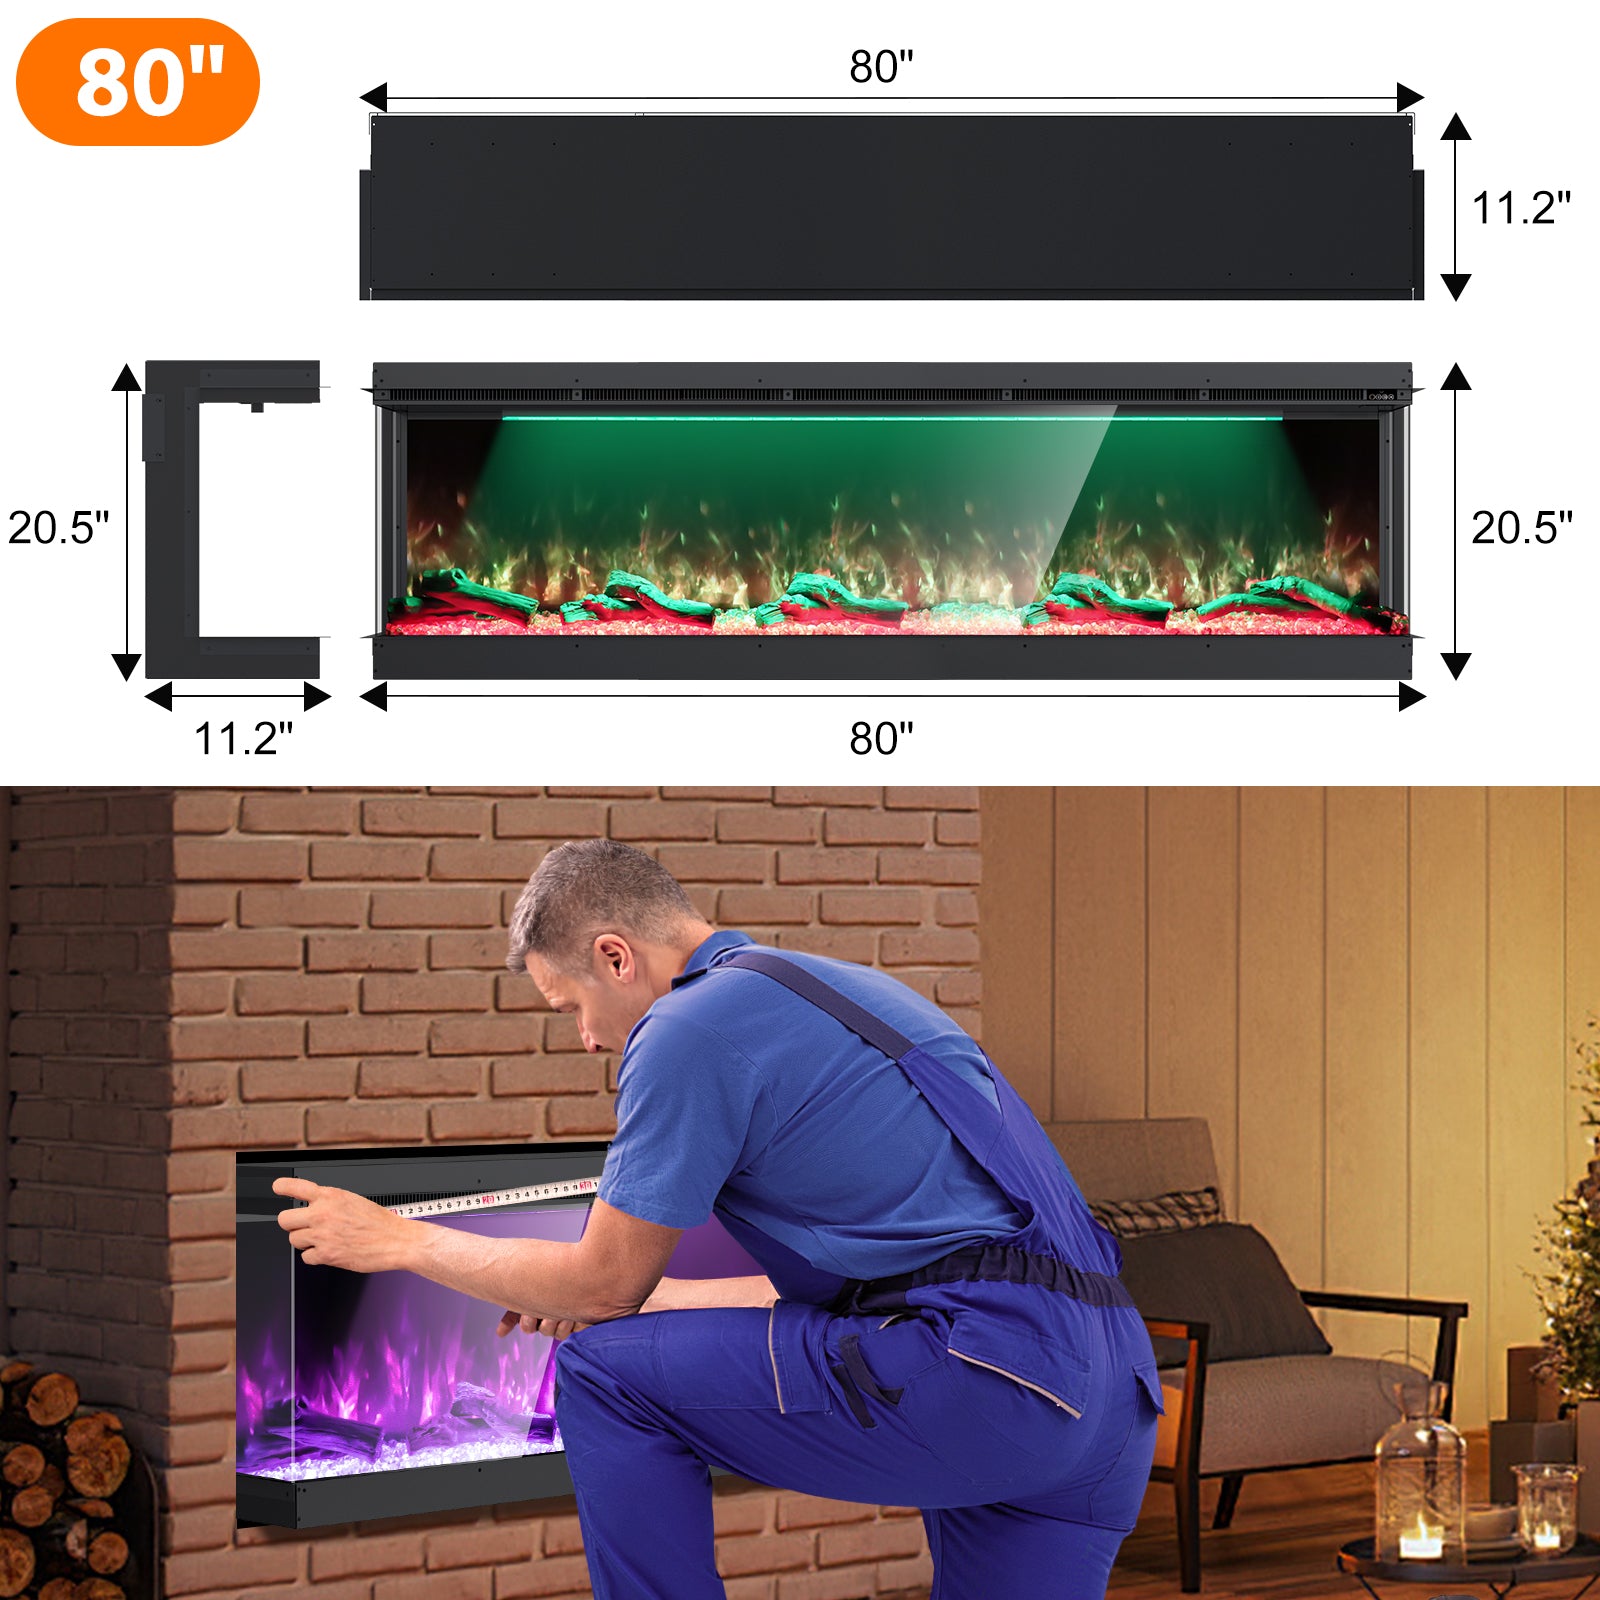 Recessed 3-Sided Electric Fireplace, 80-inch Smart WiFi 251 Flame Colors Combination Inserts Eletric Fire Place Heater for Living Room Indoor Use with Remote Control, Log & Crystals, Black